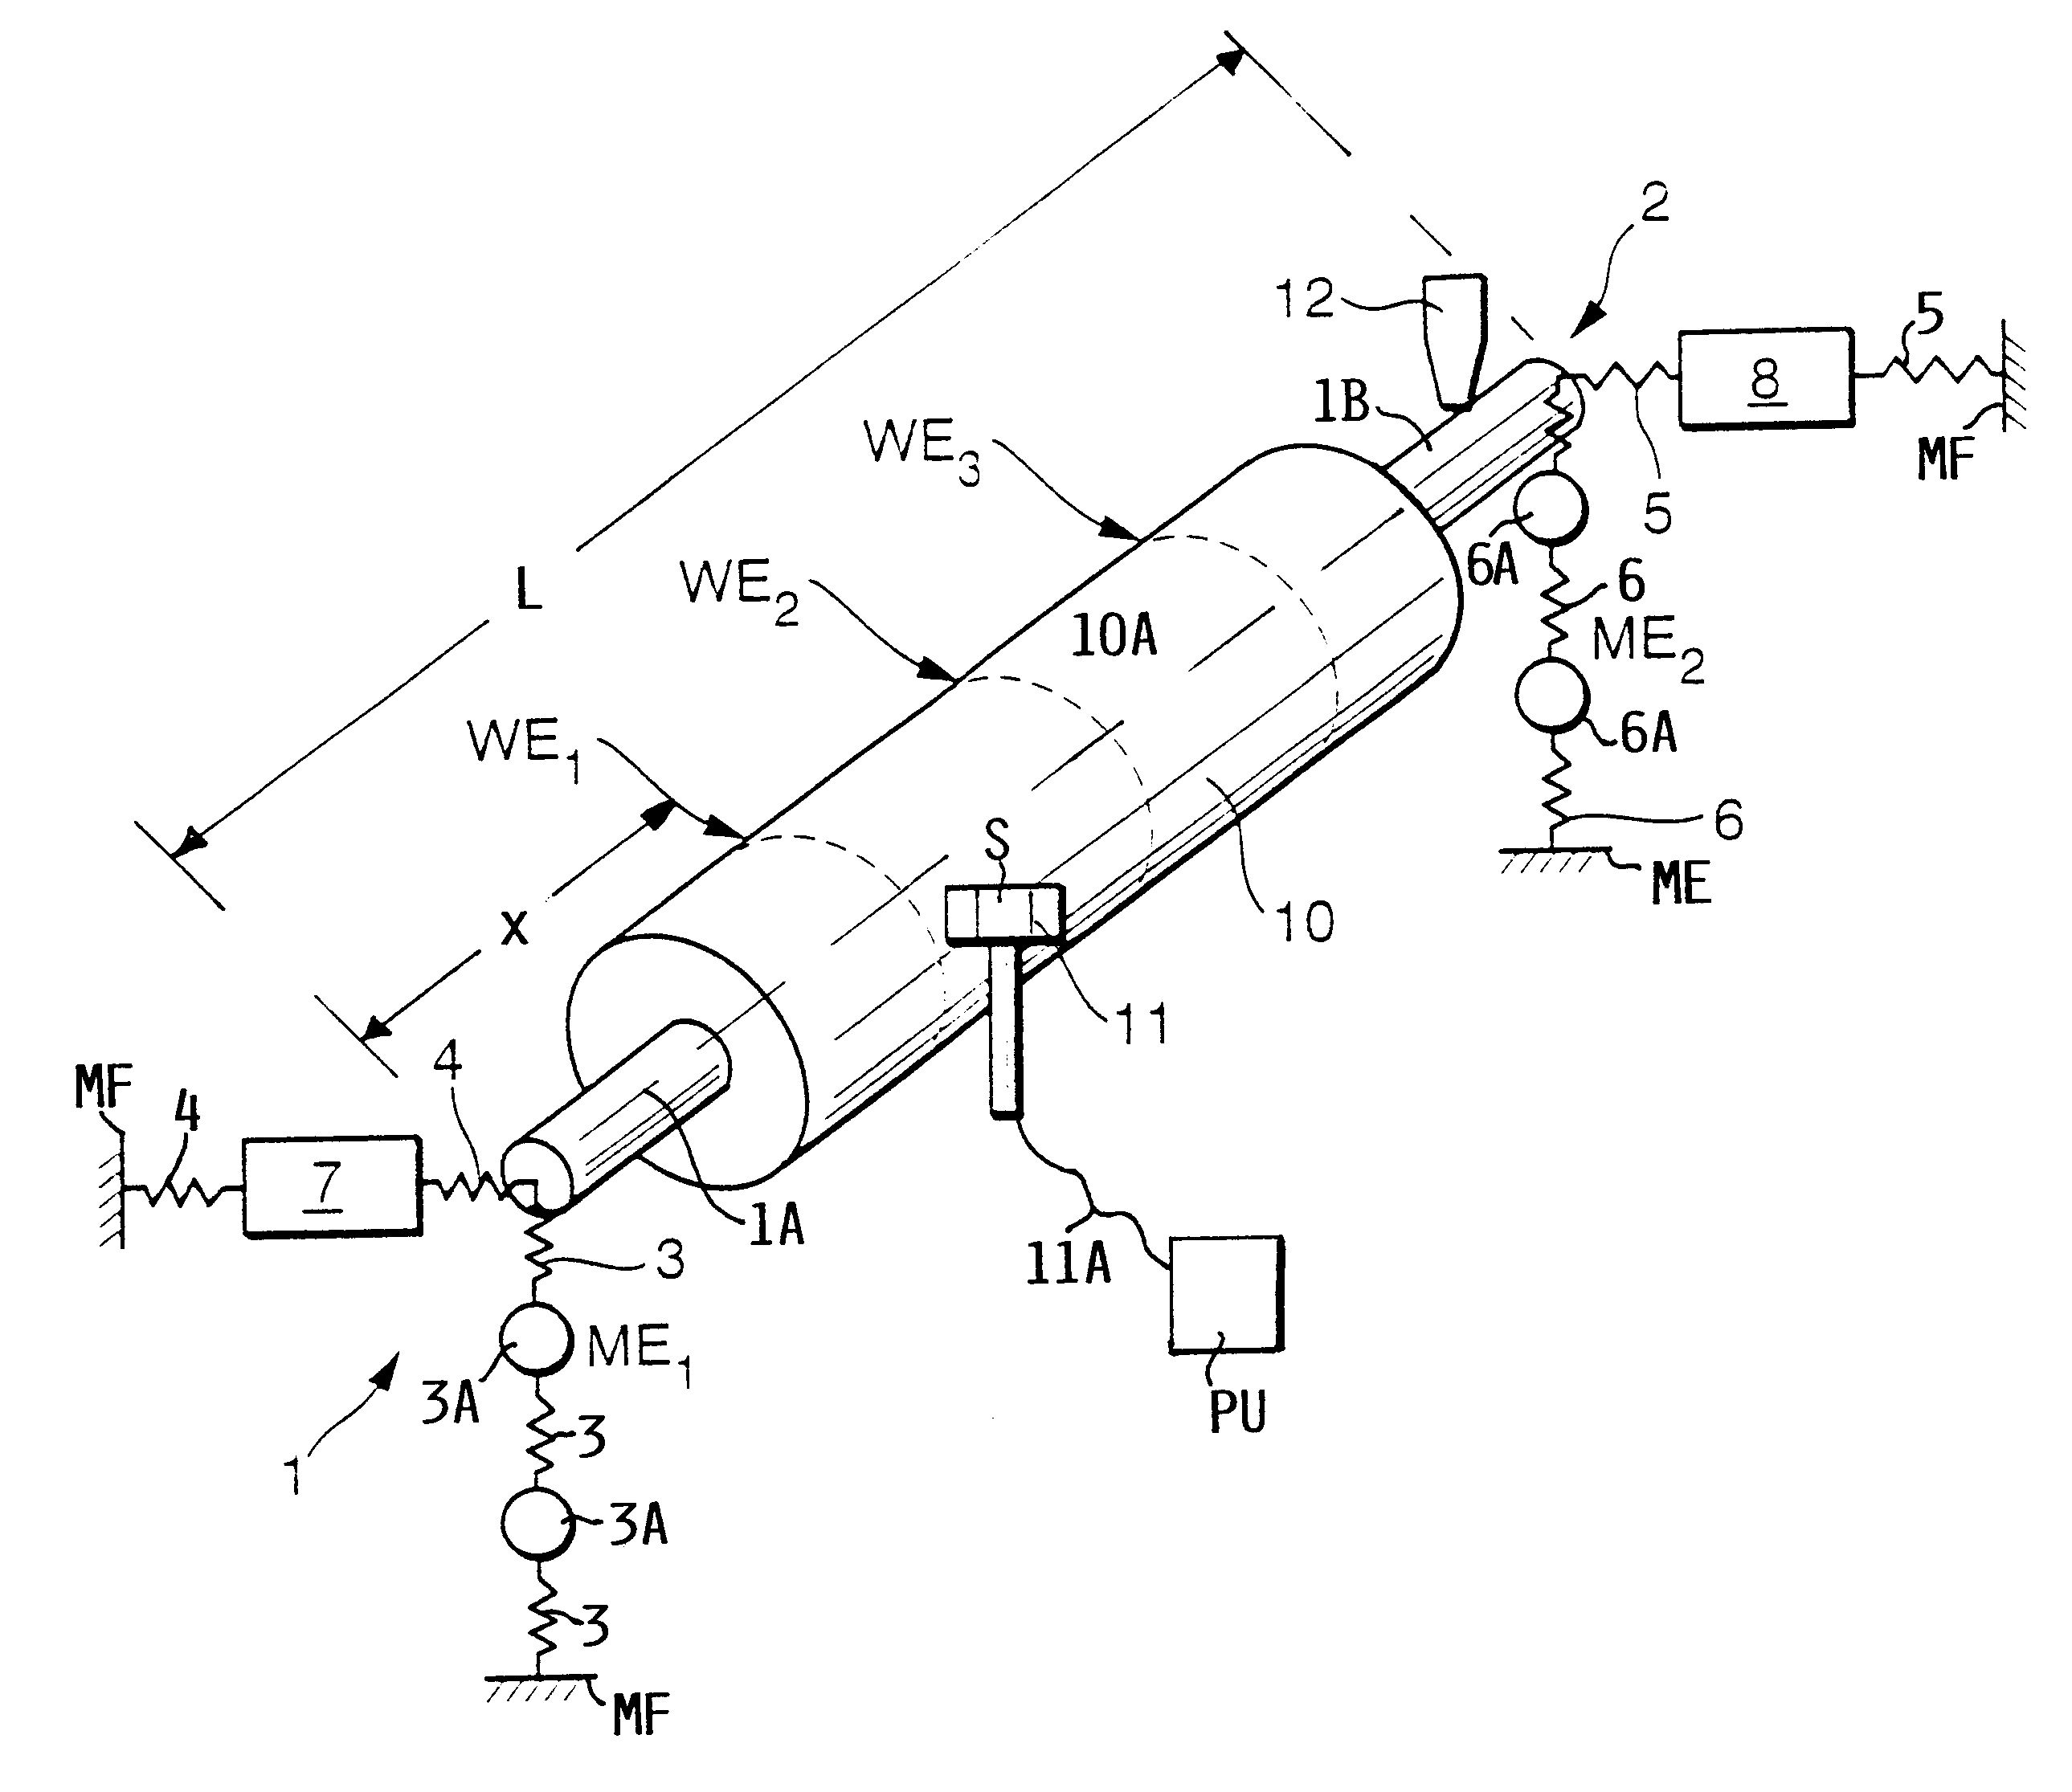 Ascertaining information for compensating an unbalance of elastic rotors